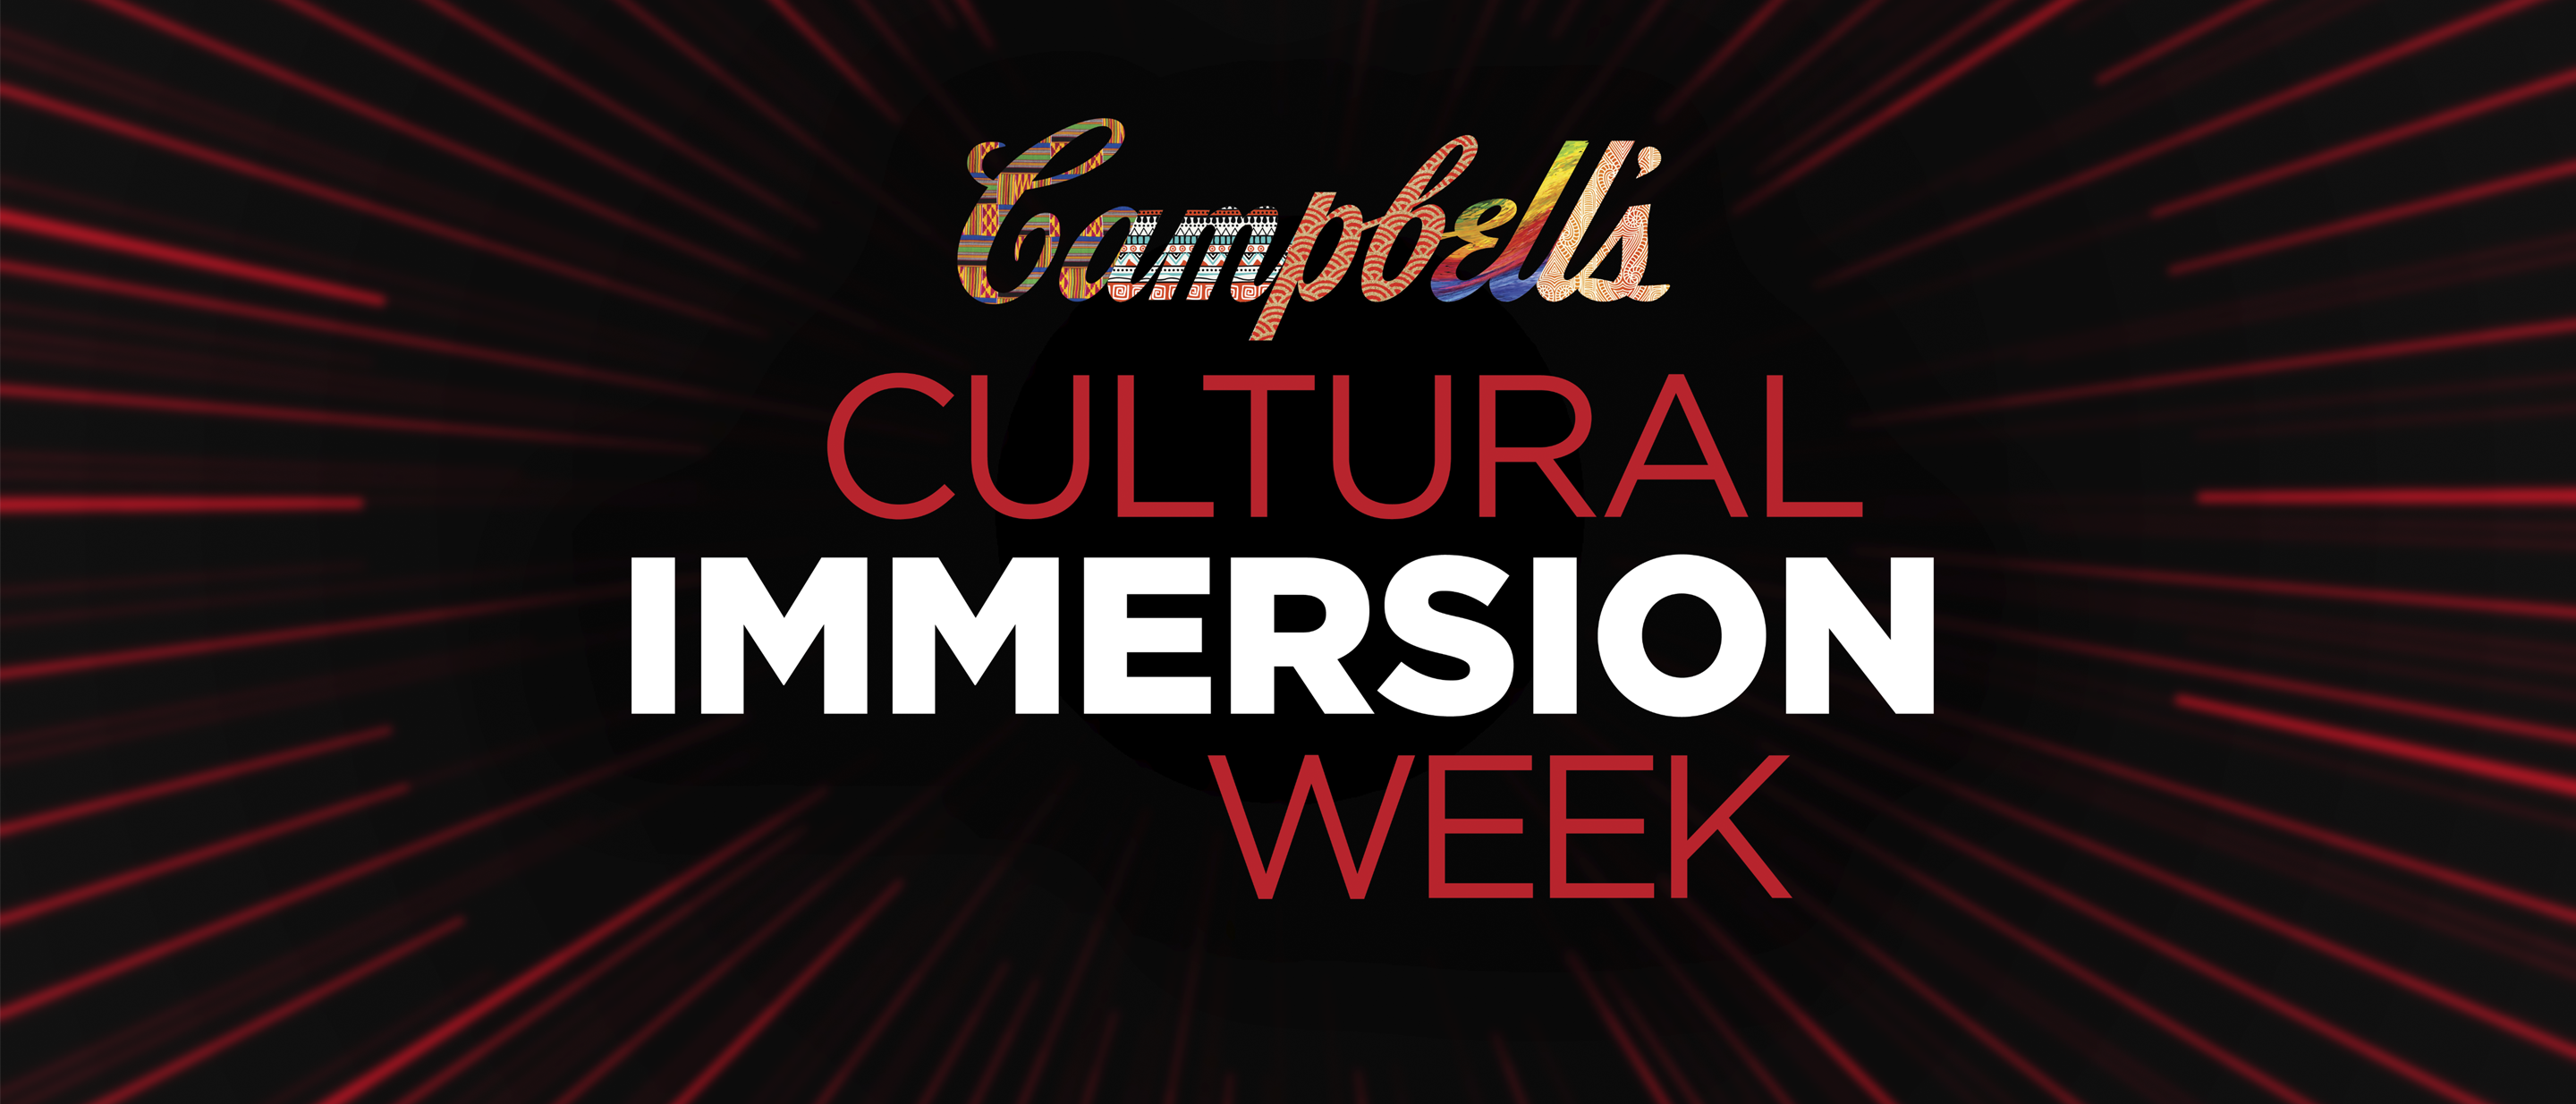 Understanding and appreciating our cultural differences - Campbell Soup